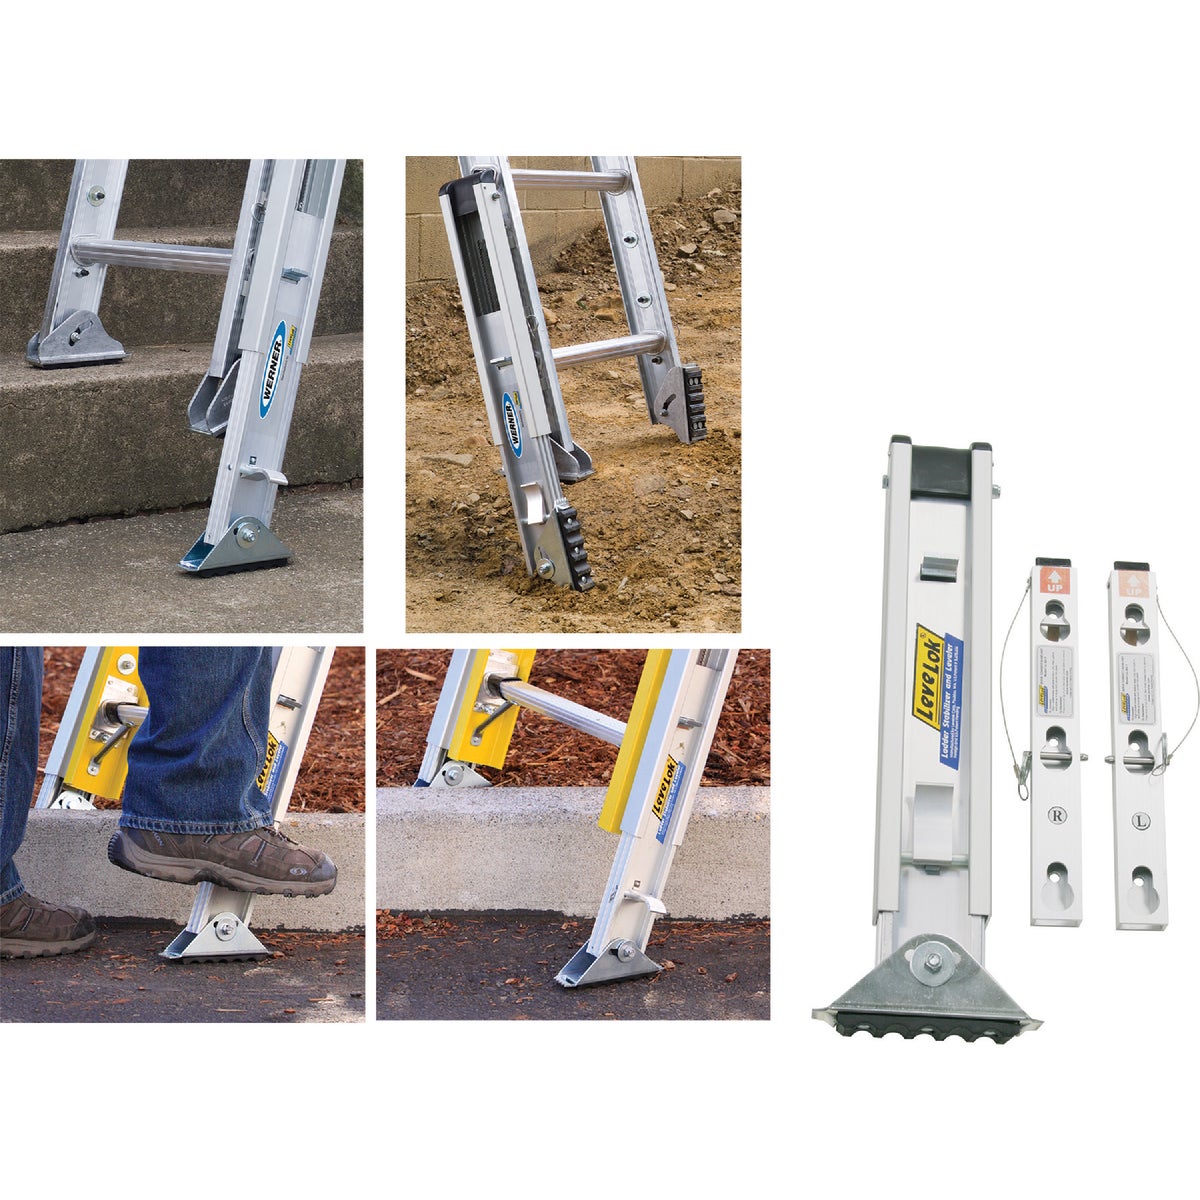 Item 786284, Levelok leveler with 2 base attachments will provide safety on uneven 